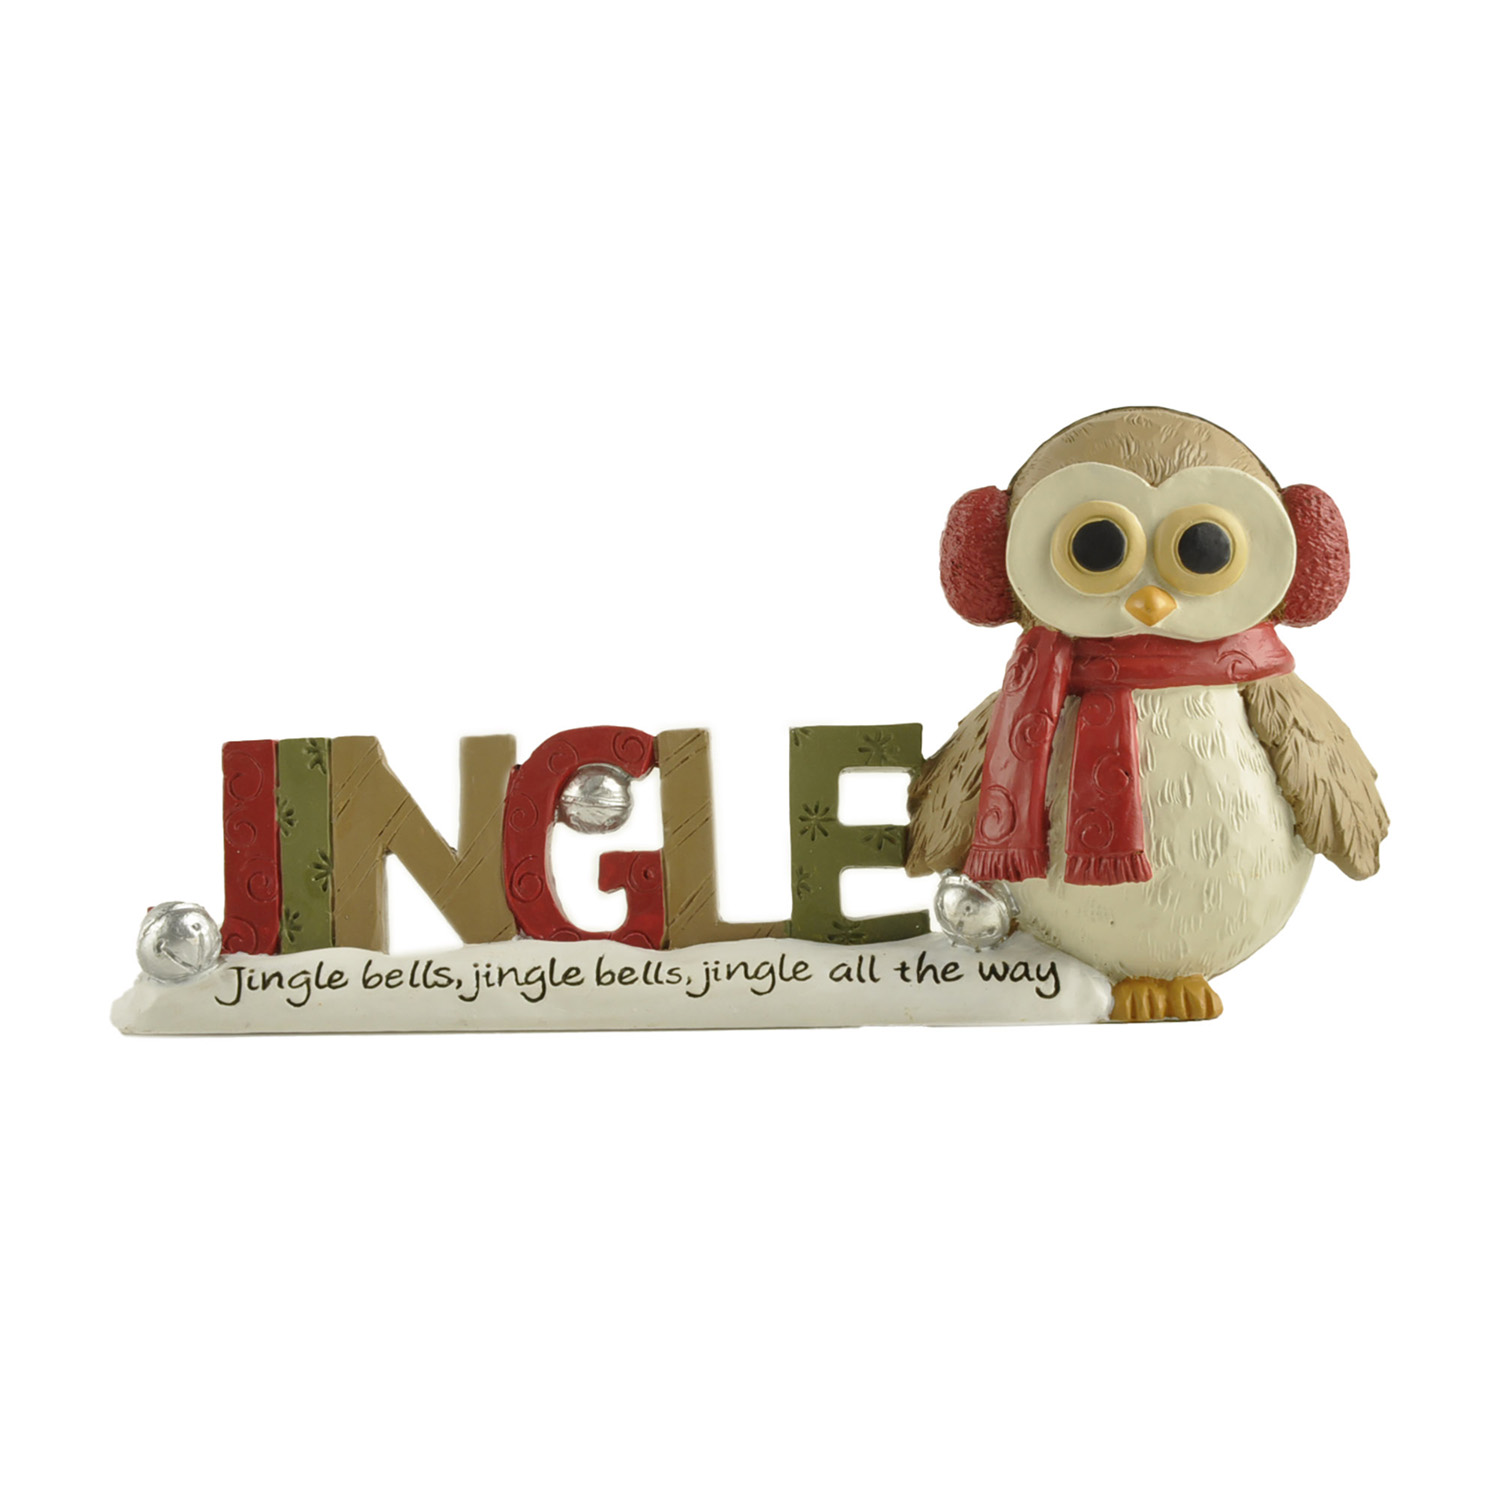 Festive Resin Owl with 'Jingle Bells' Sign – Adorable Christmas Decoration for Home and Holiday Cheer 238-13901